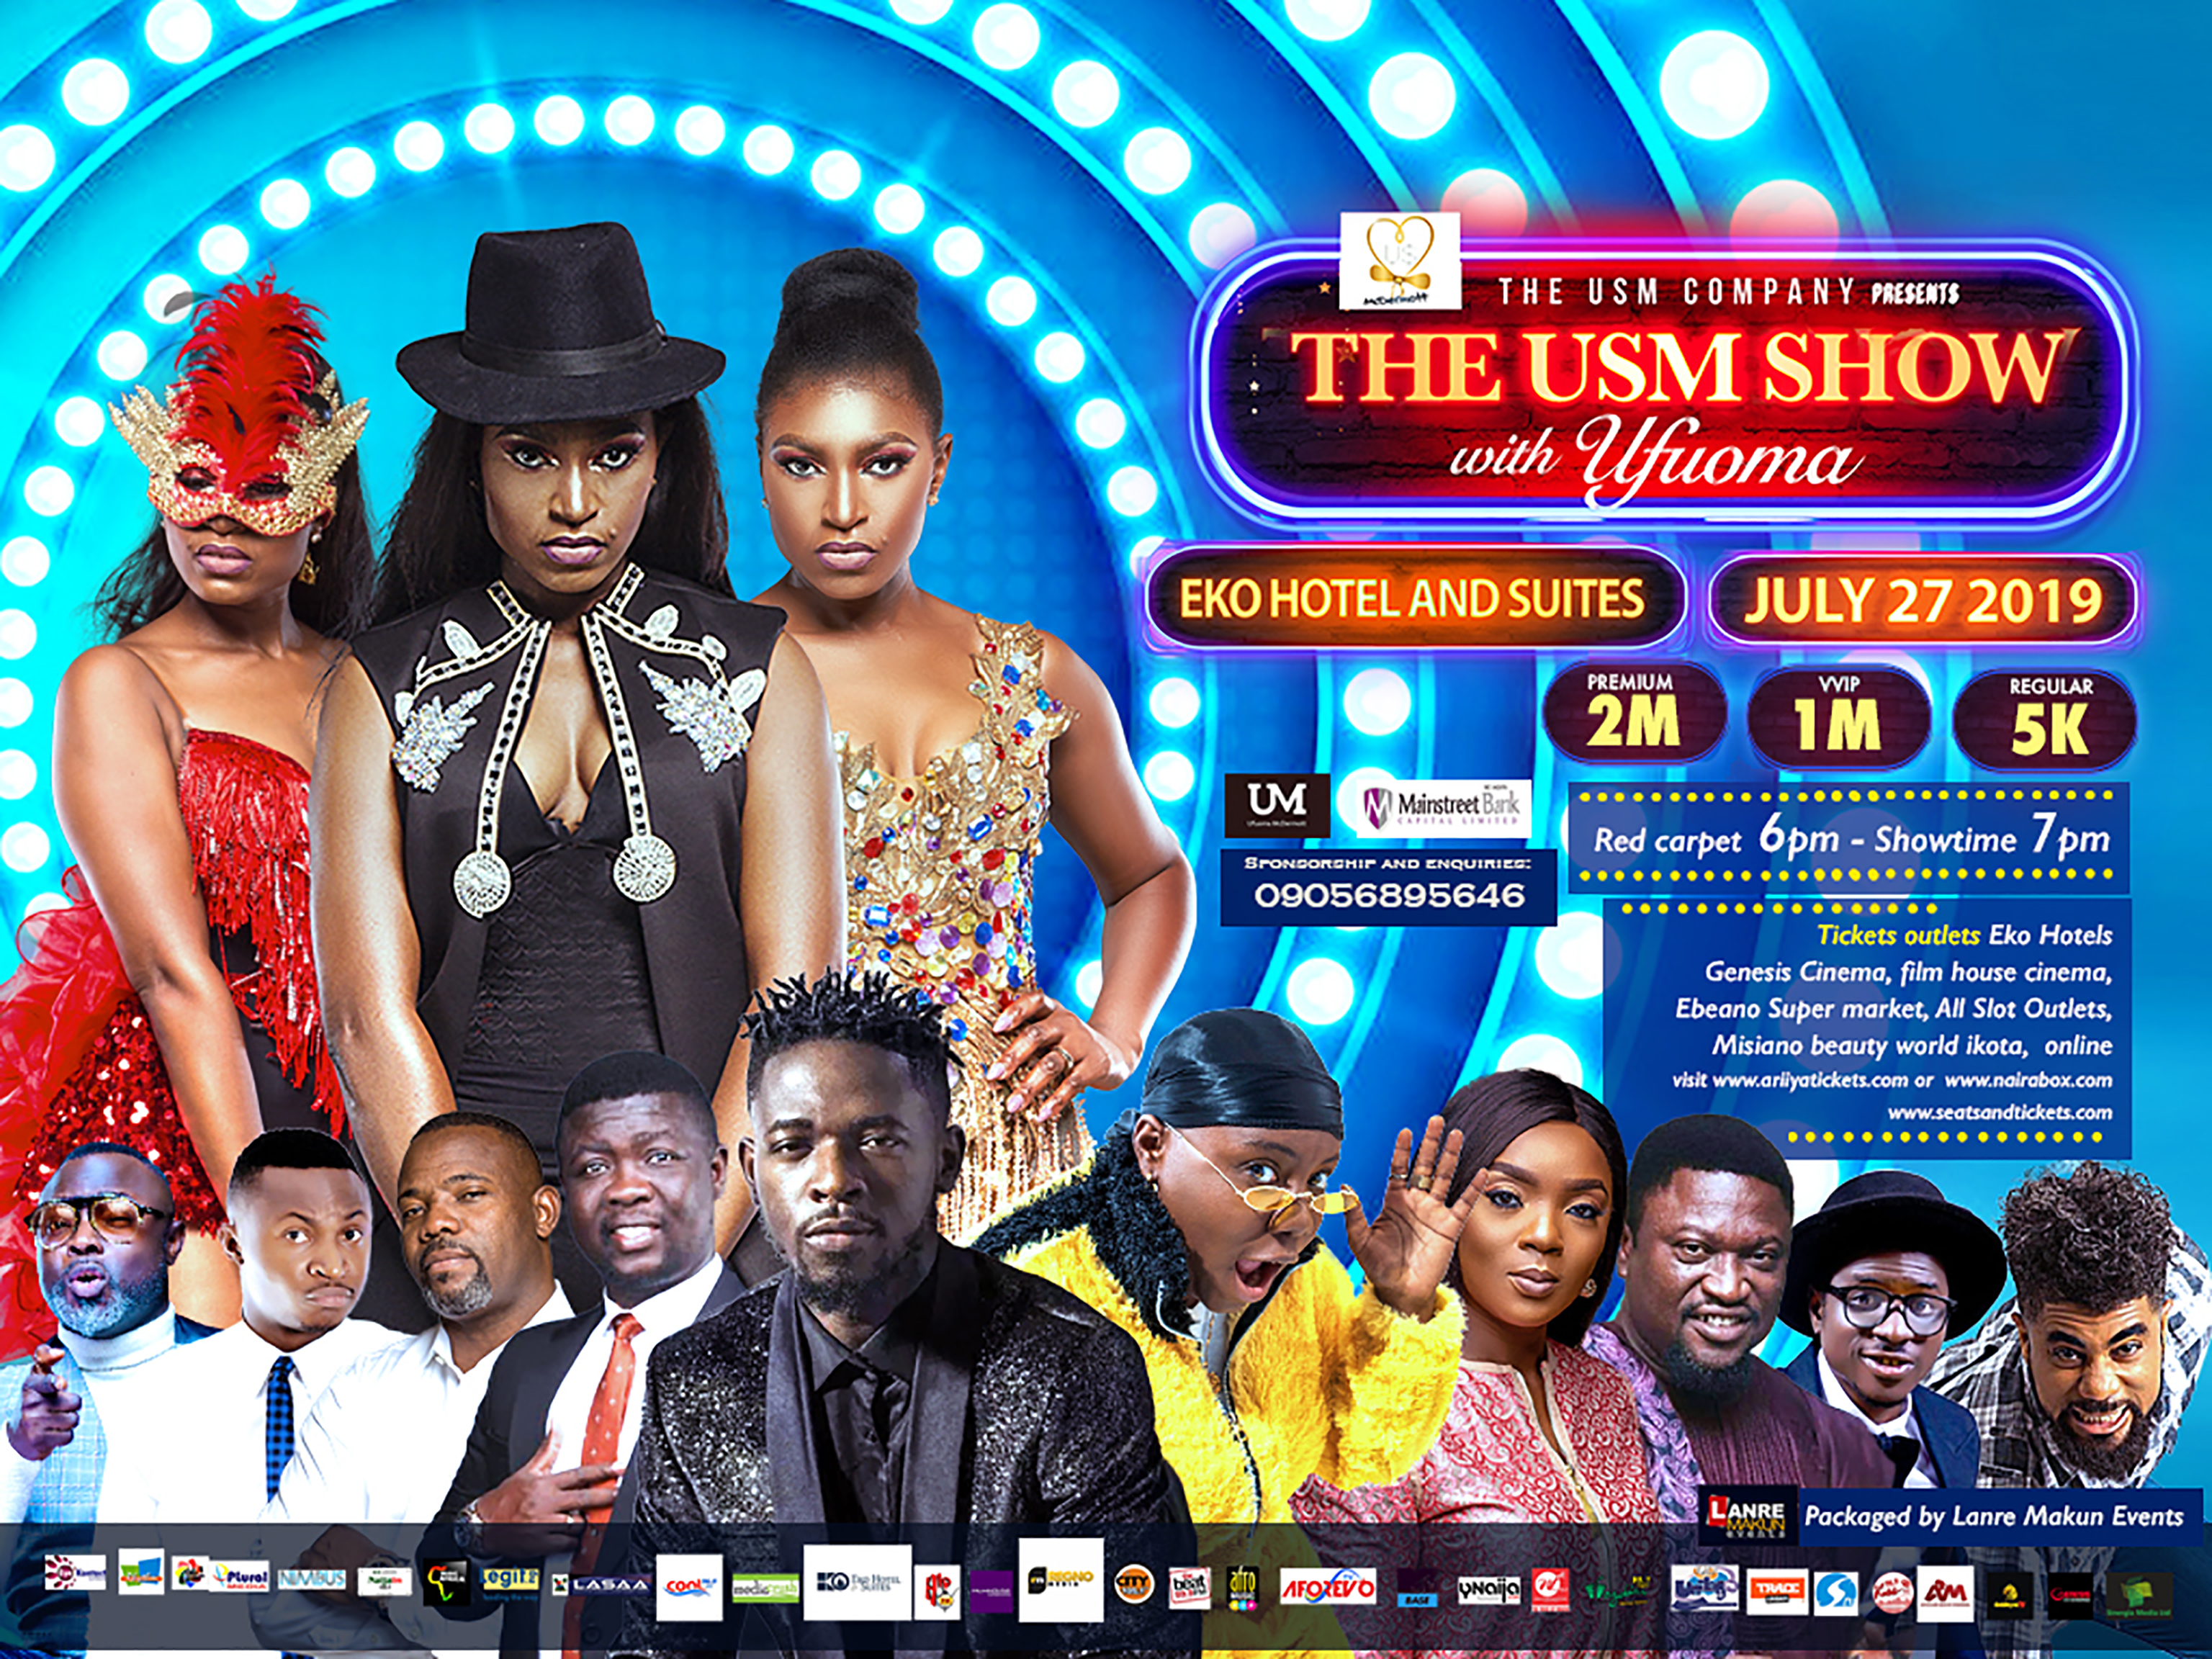 USM SHOW WITH Ufuoma